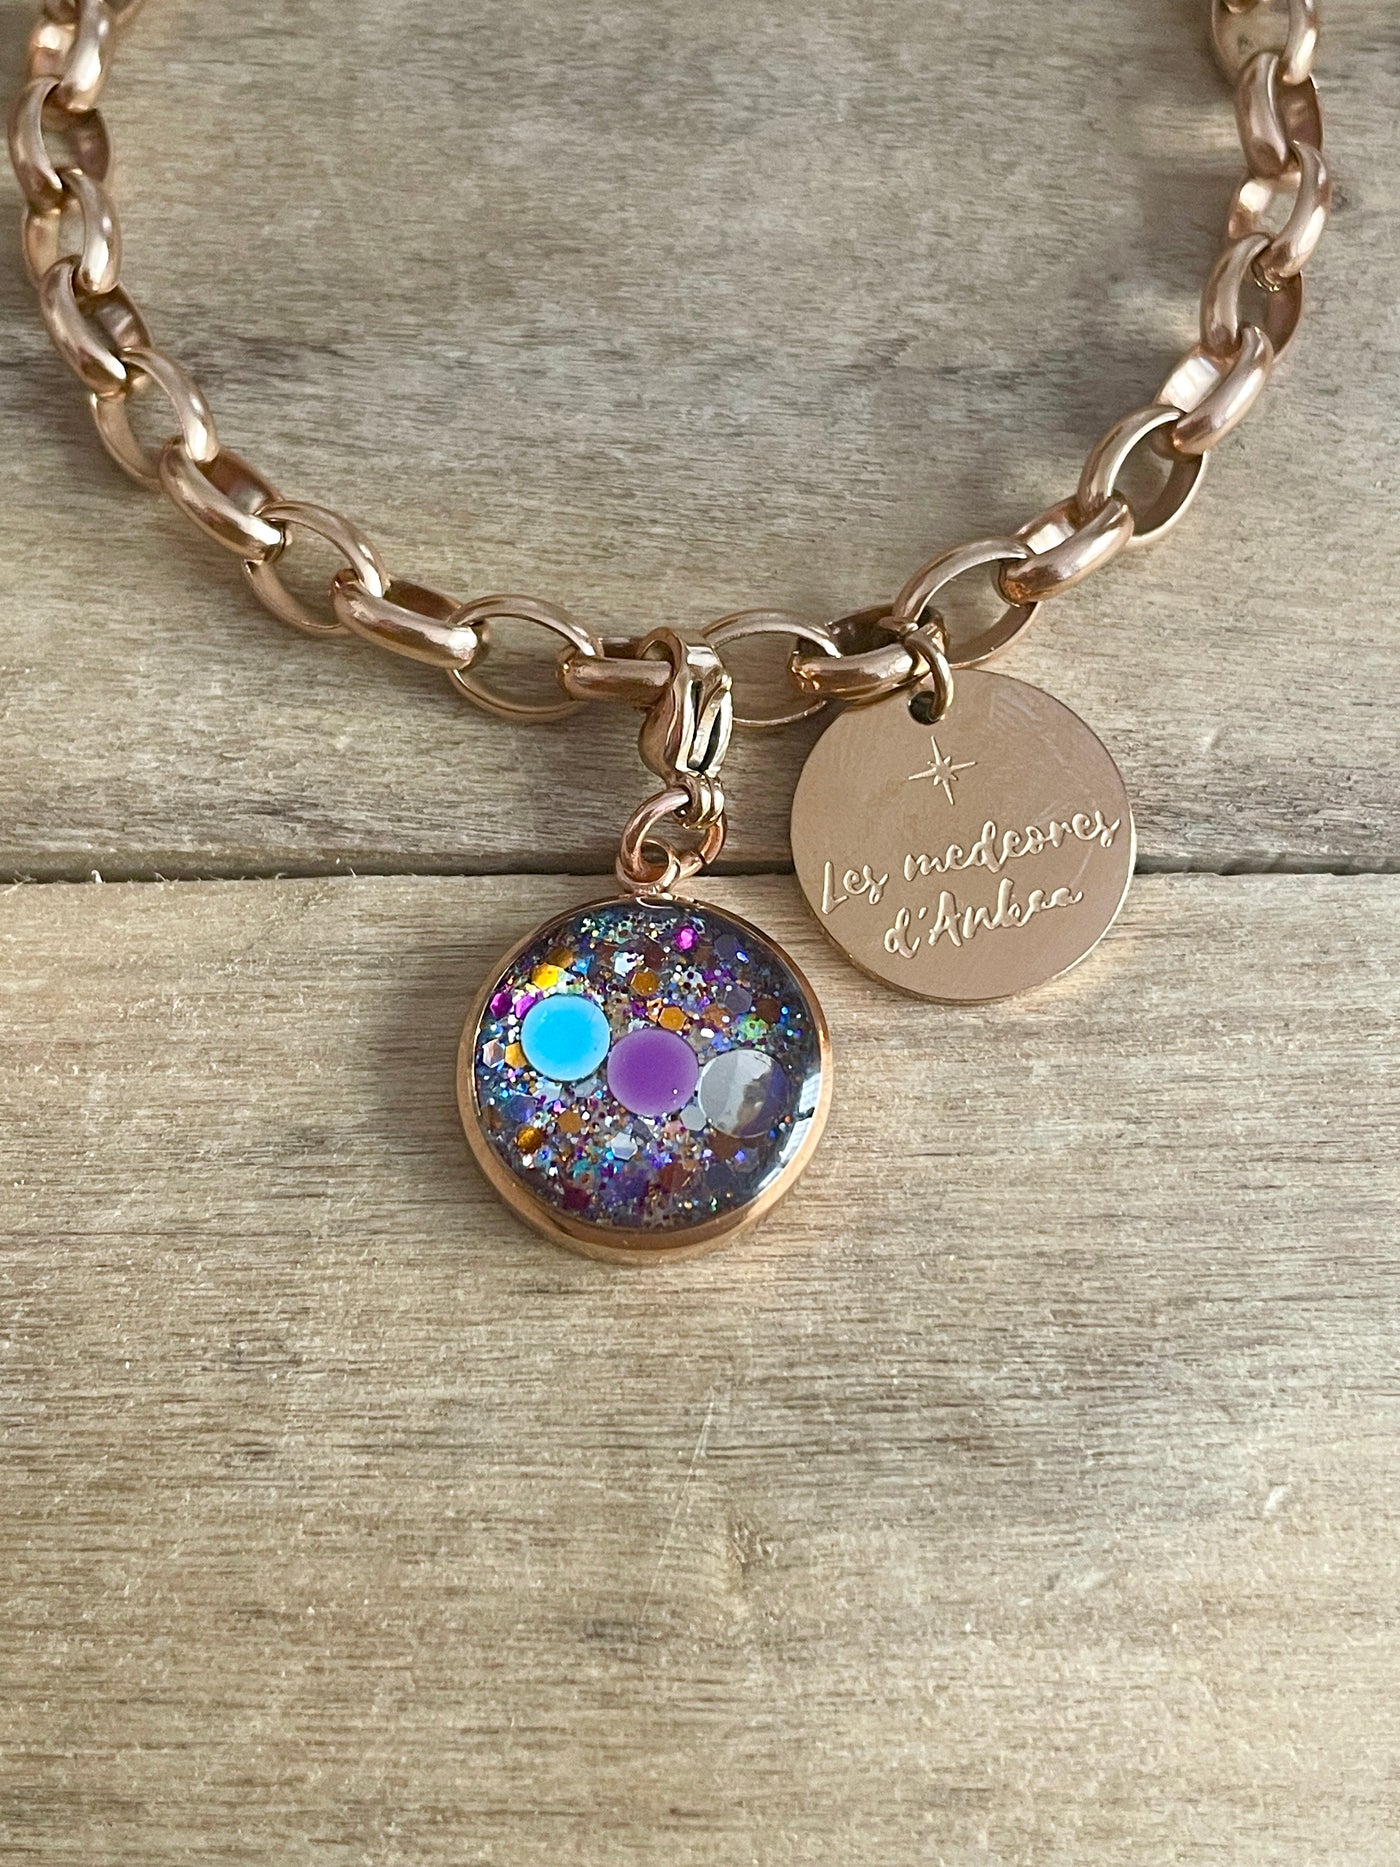 Medeore rose gold Om charm (charm sold alone)